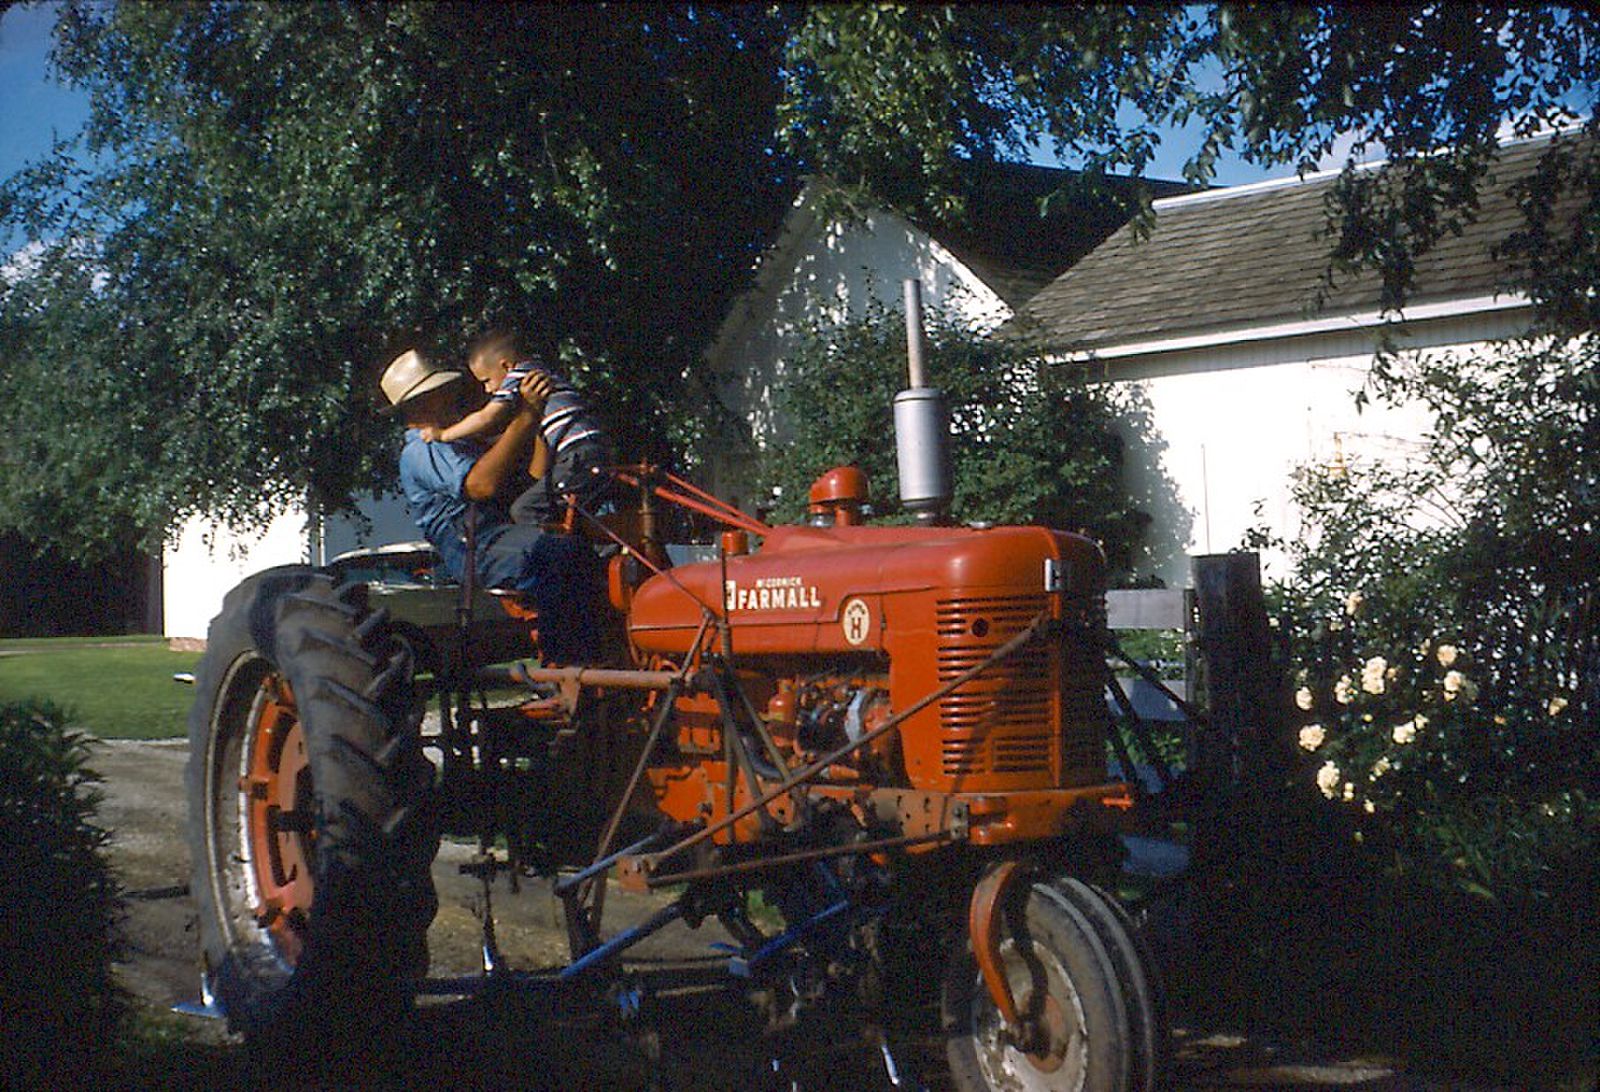 A ride on the tractor was fun, especially when I knew Grandpa would not let me fall. 1957 Kodachrome slide, taken near Blandinsville, Illinois. View full size.